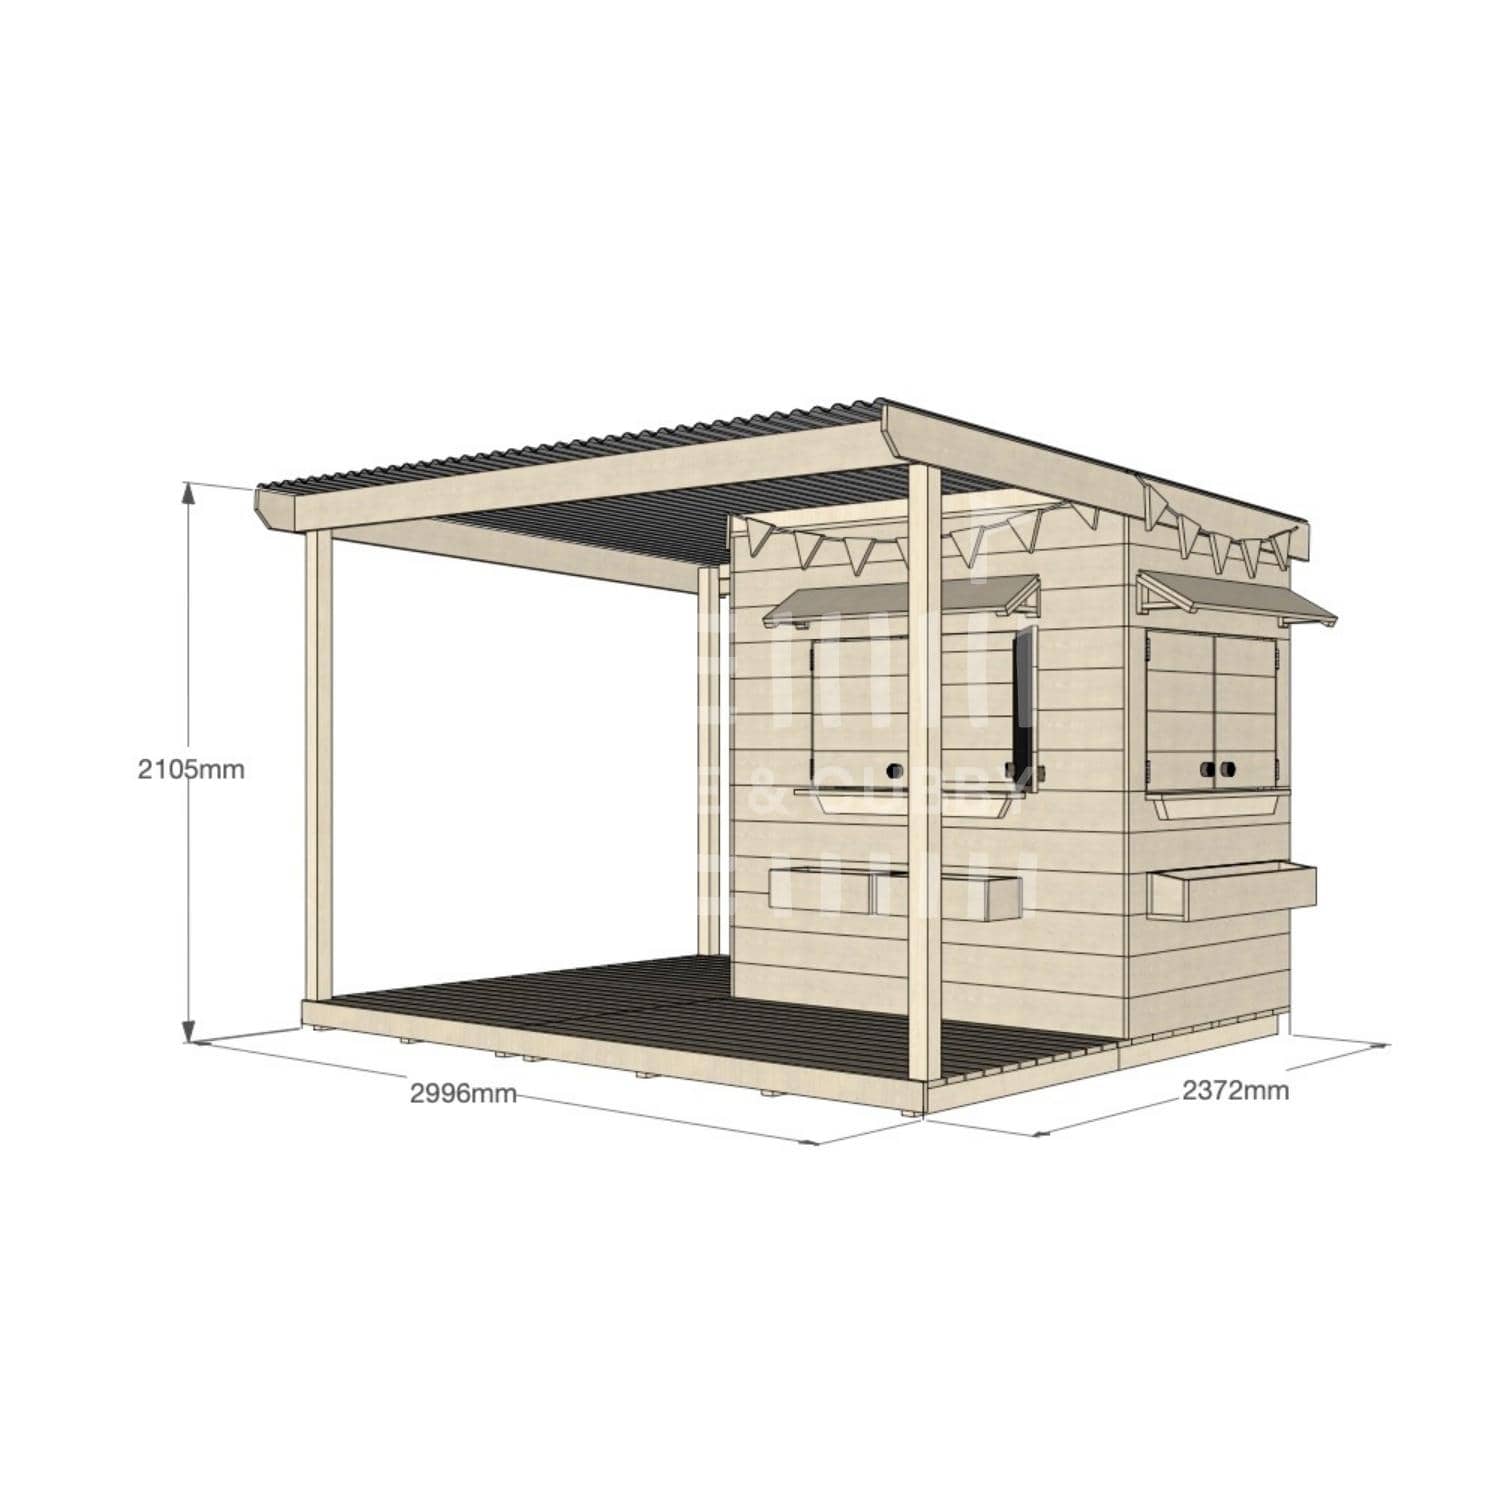 Raw pine extended height house with wraparound verandah for residential backyards little rectangle size with dimensions